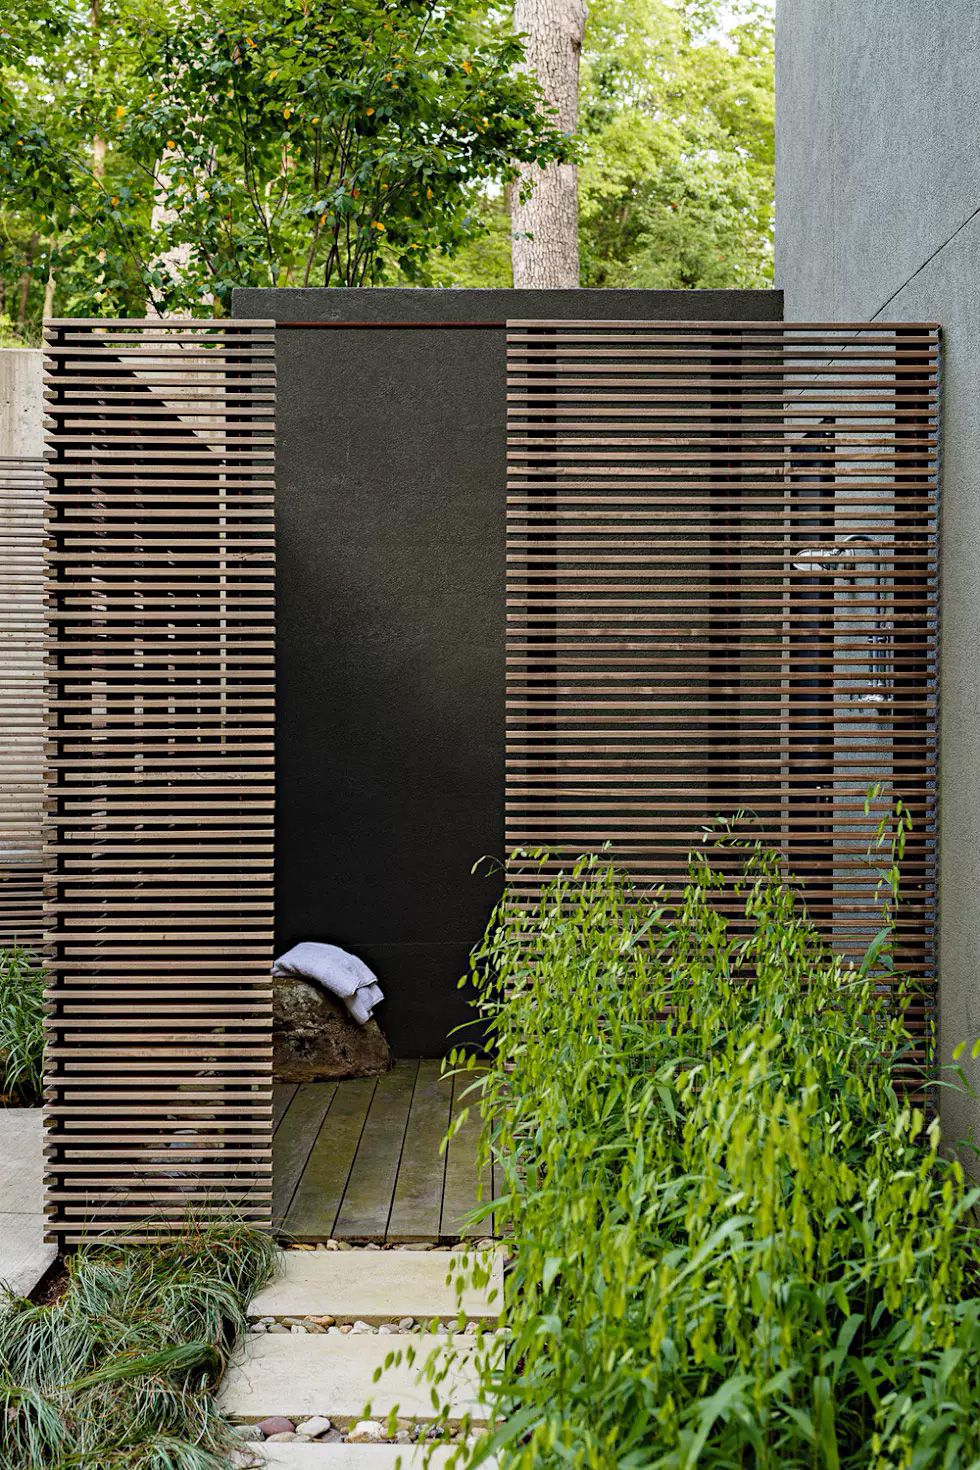 An ultra-modern outdoor shower enclosure merges wood and concrete to create a private space to get clean on a warm day. #backyard inspiration via www.L-2-Design.com